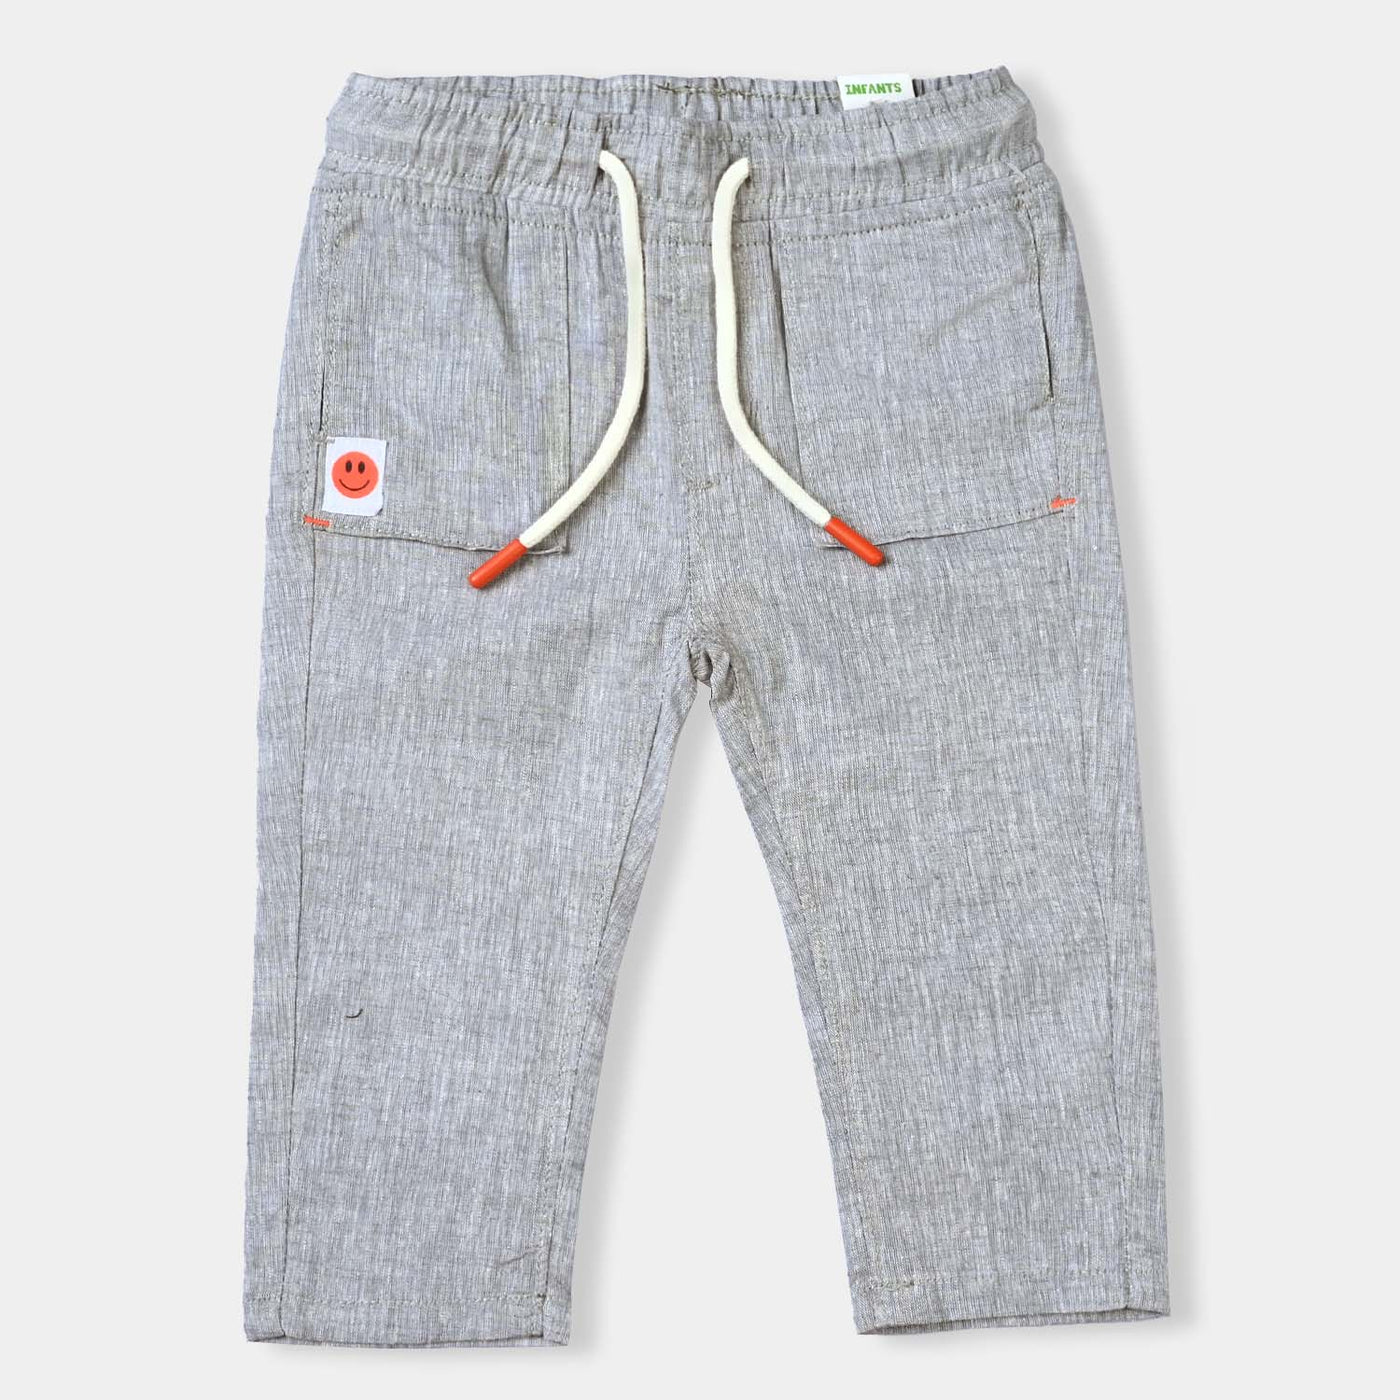 Infant Boys Cotton Pant Awesome - Grey